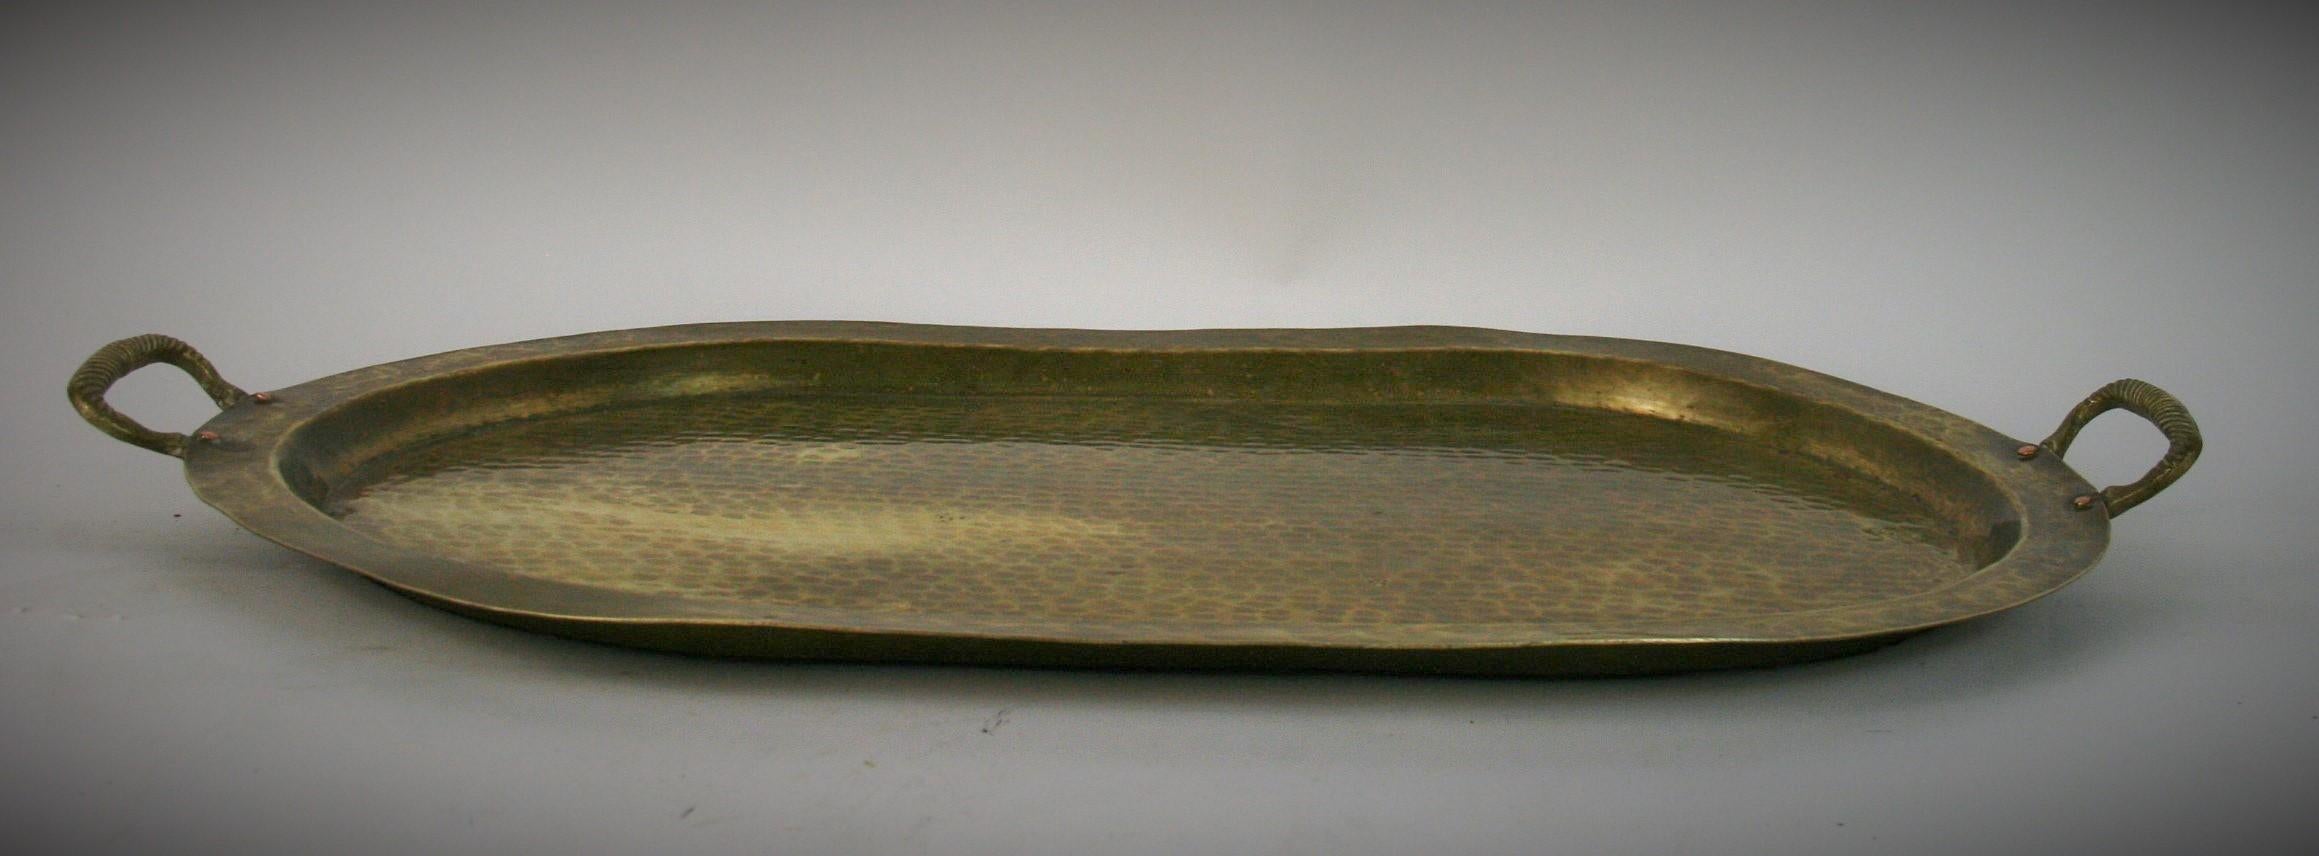 Hammered Brass Serving Tray 2